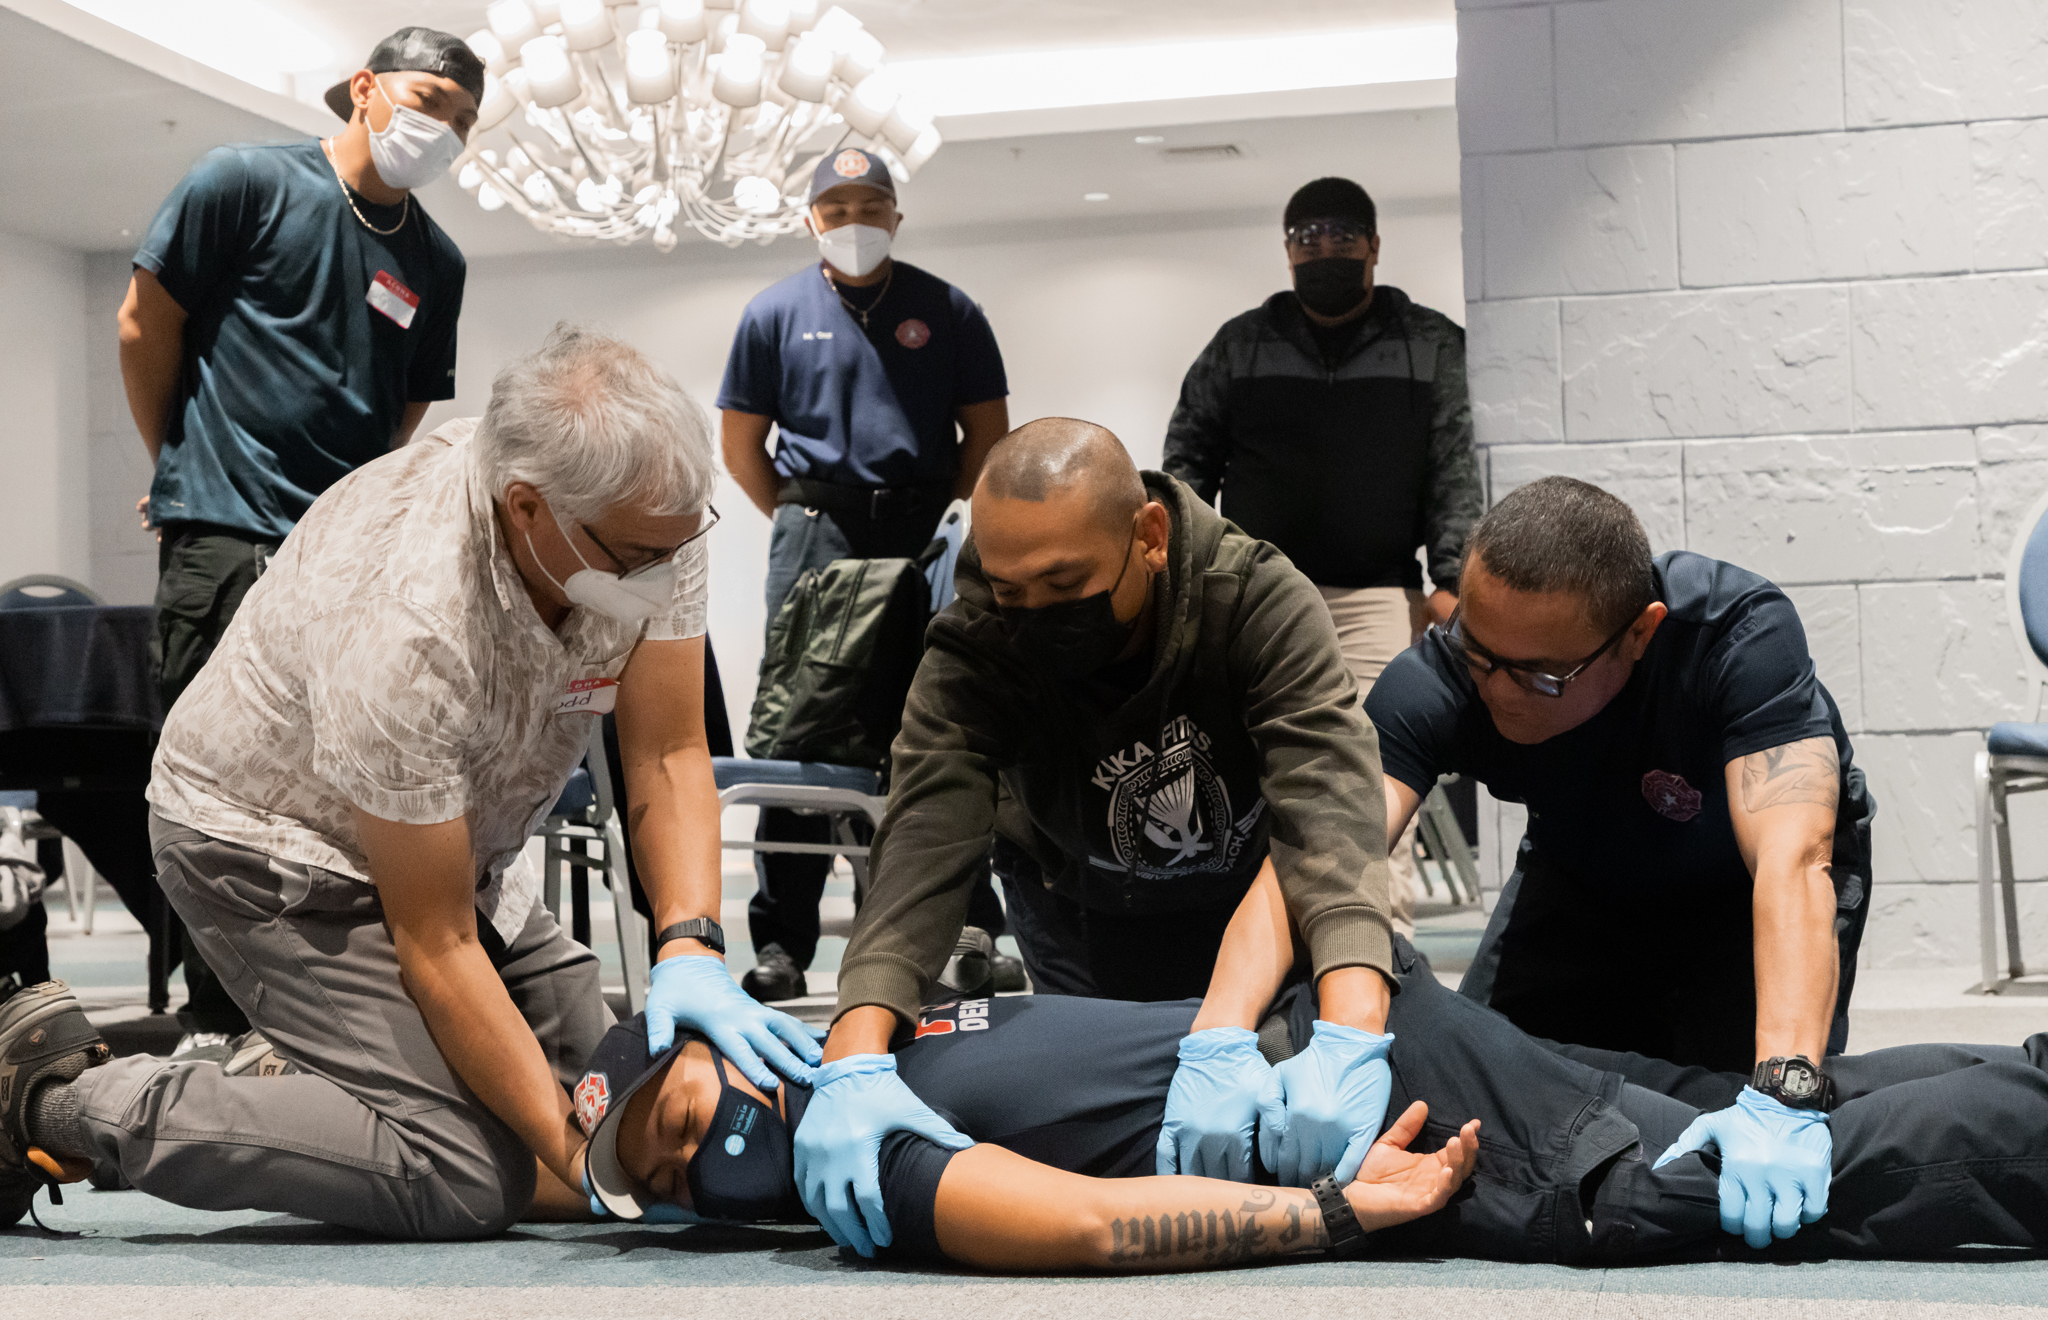 First Aid Training As a Tool to Strengthen Community Resilience